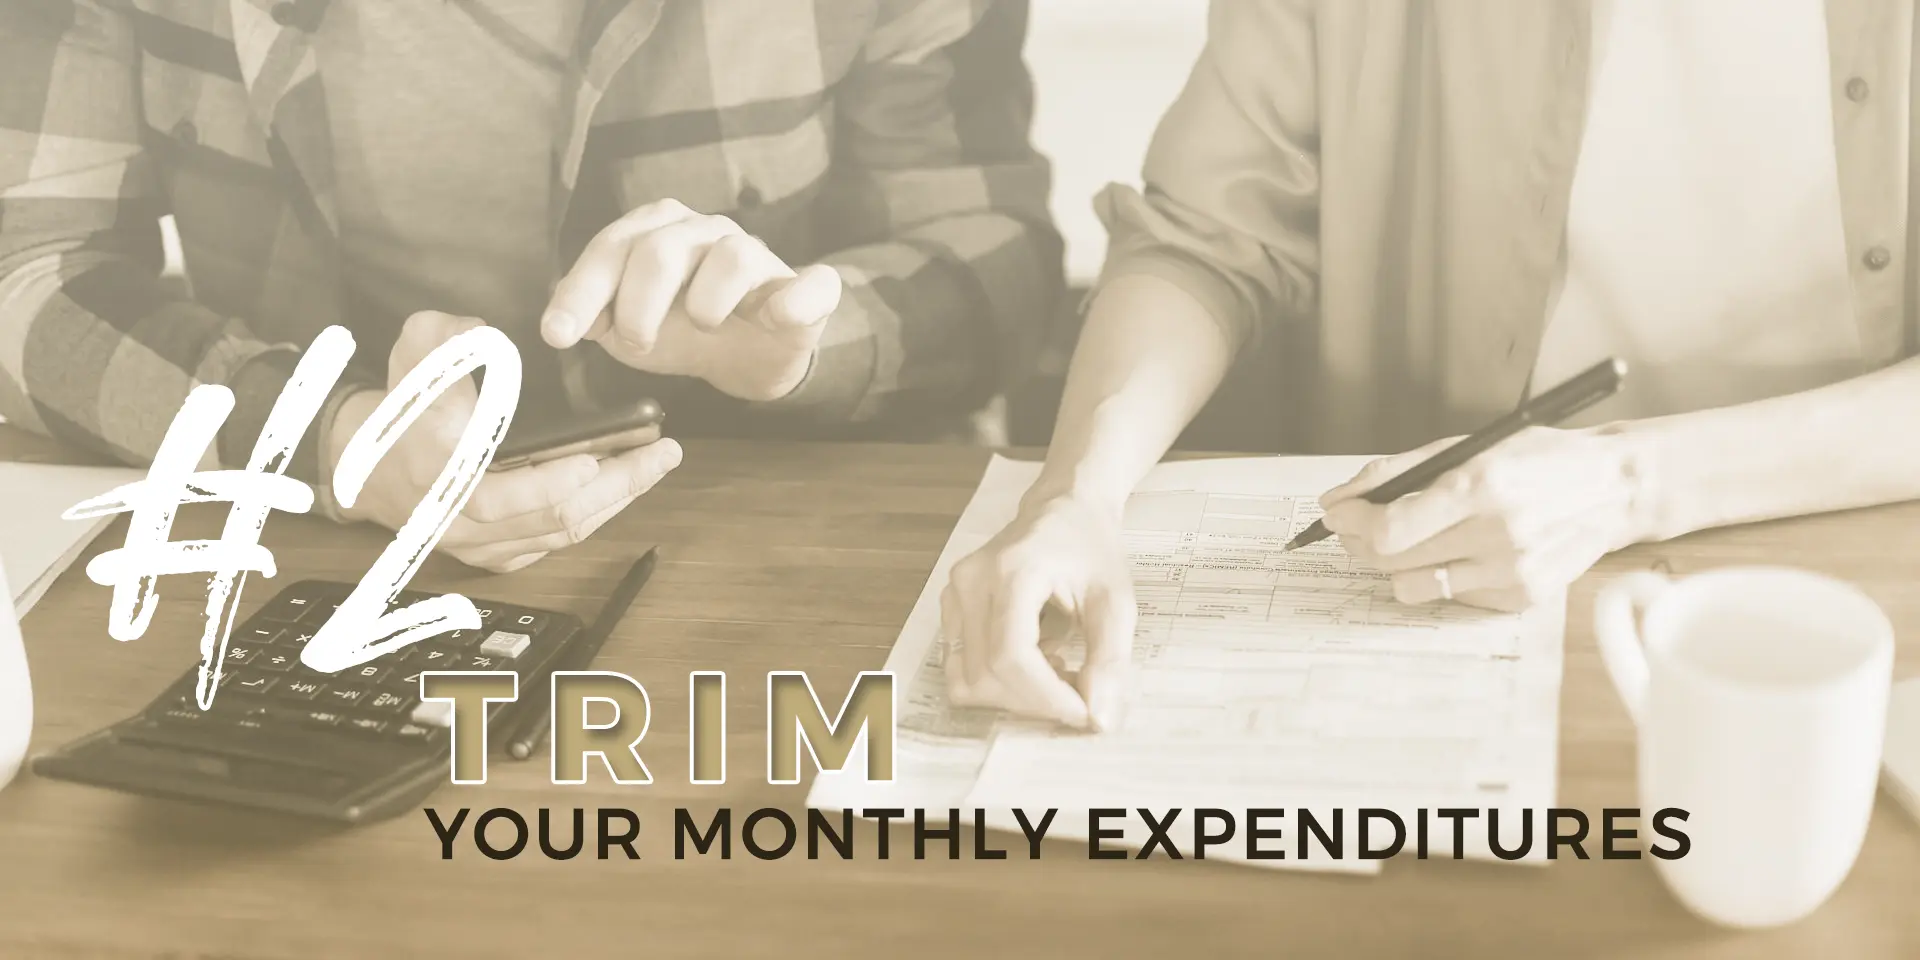 Tip #2: Trim Your Monthly Expenditures